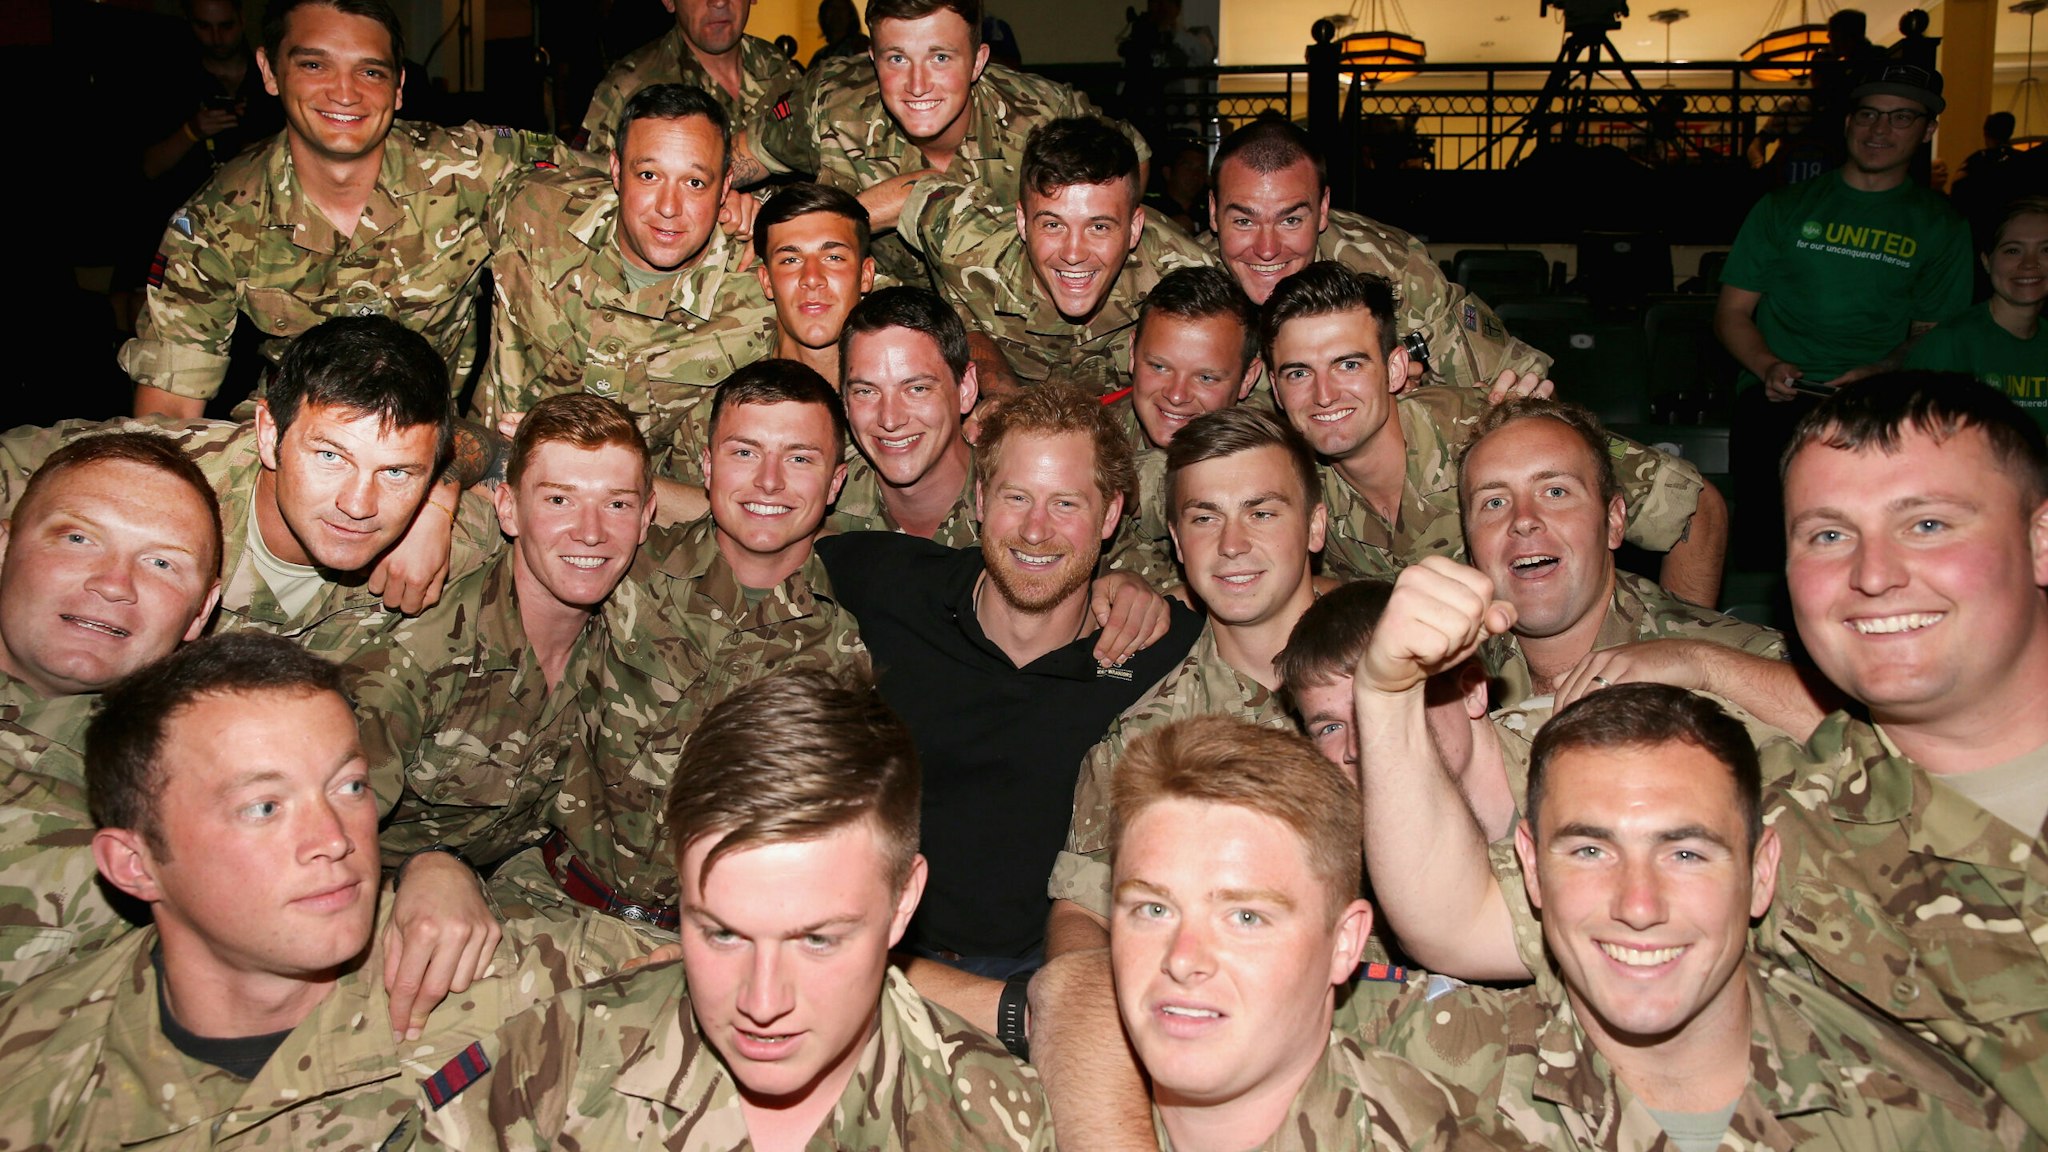 ORLANDO, FL - MAY 09: Prince Harry meets members of the British Military at the powerlifting during the Invictus Games Orlando 2016 at ESPN Wide World of Sports on May 9, 2016 in Orlando, Florida. Prince Harry, patron of the Invictus Games Foundation is in Orlando ahead of the opening of Invictus Games which will open on Sunday. The Invictus Games is the only International sporting event for wounded, injured and sick servicemen and women. Started in 2014 by Prince Harry the Invictus Games uses the power of Sport to inspire recovery and support rehabilitation.